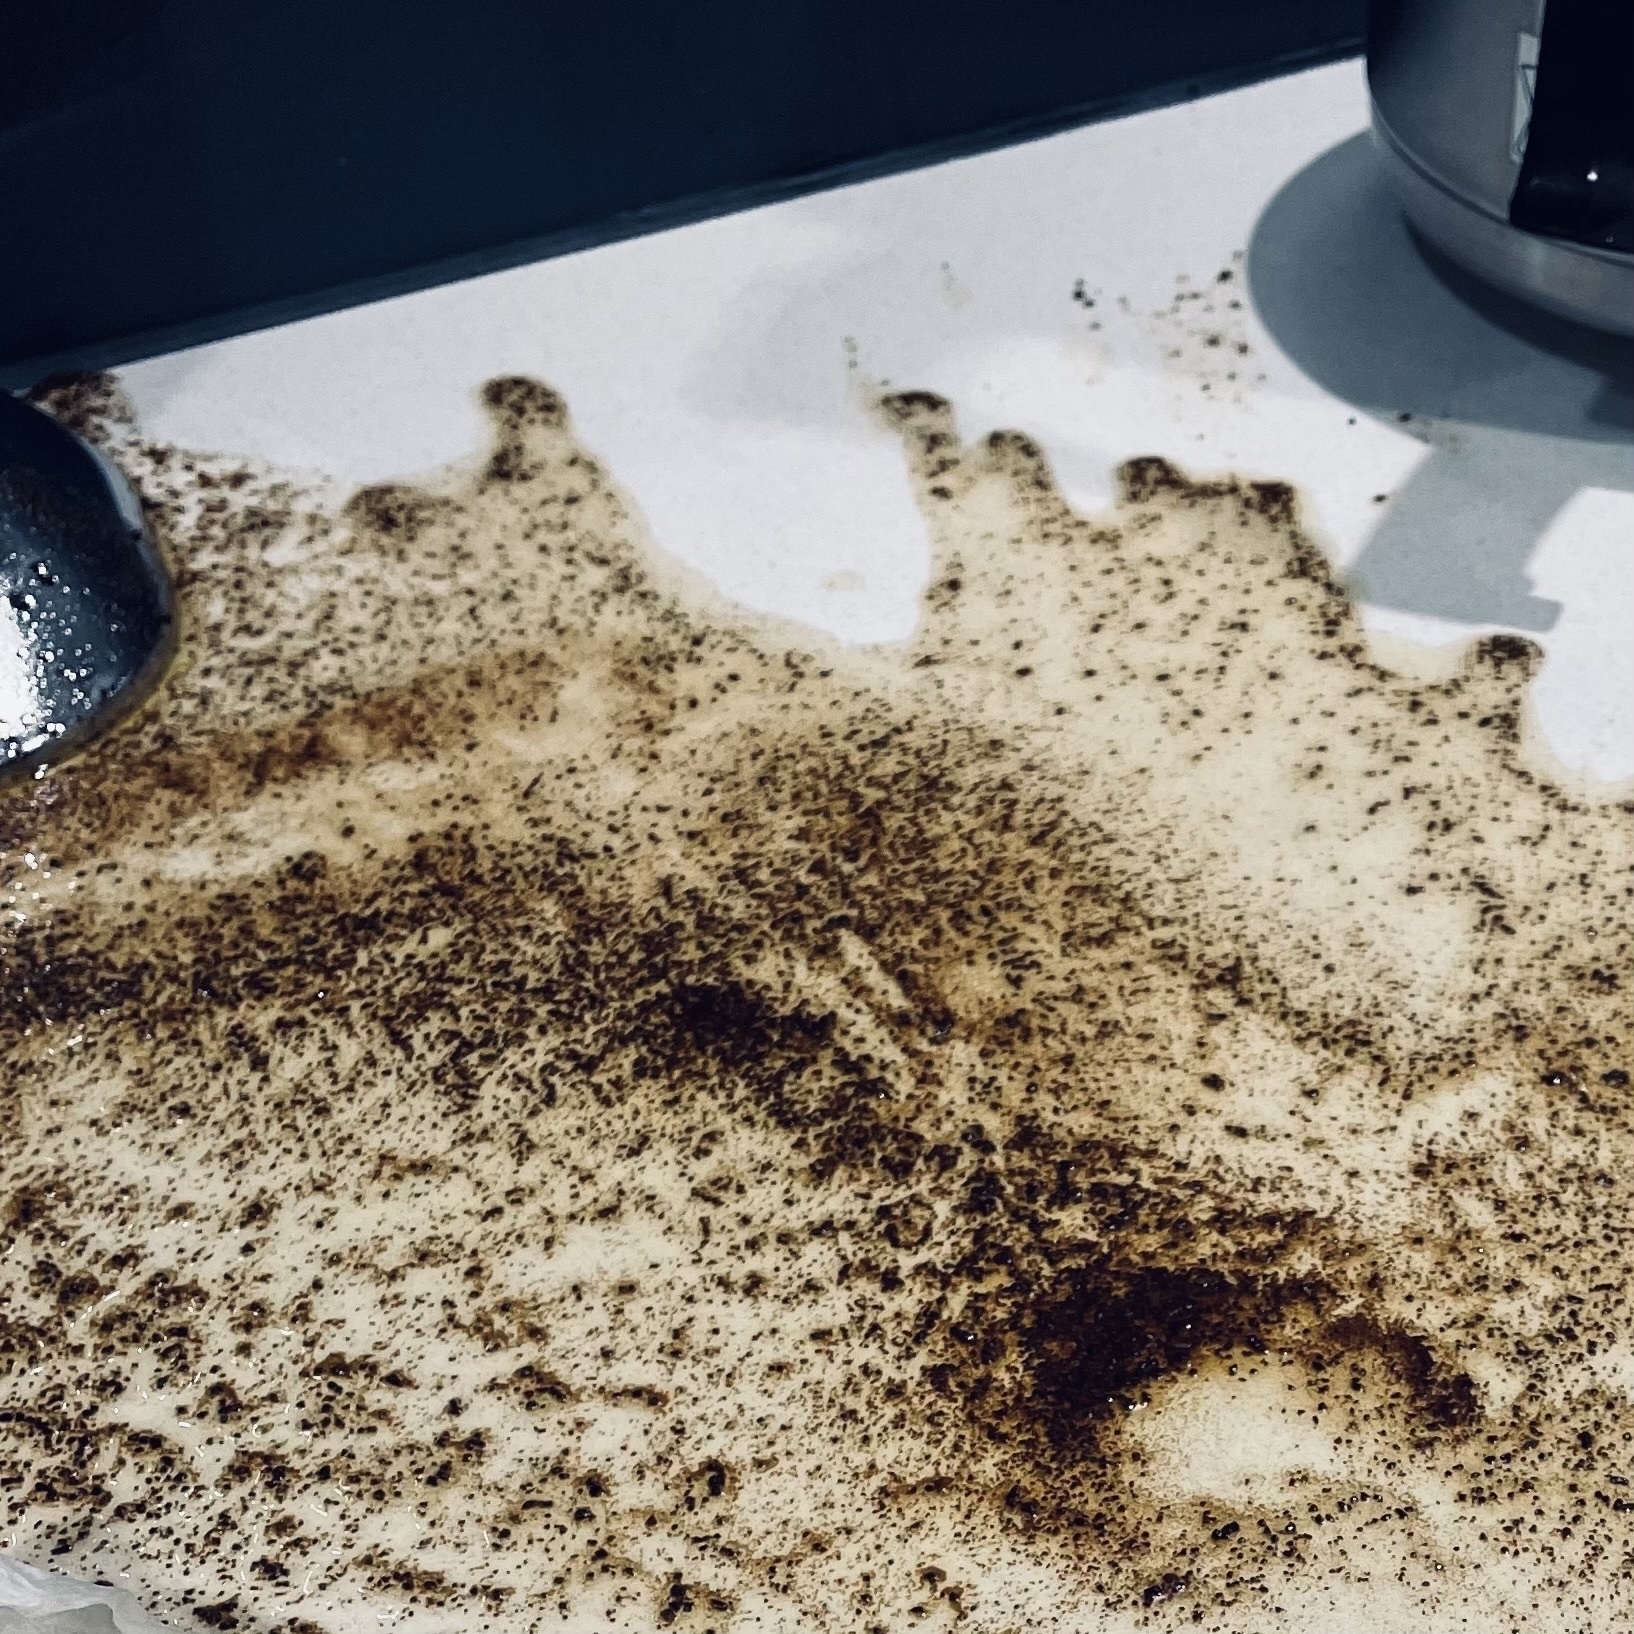 The result of an inverted aeropress topple over. What a mess. 